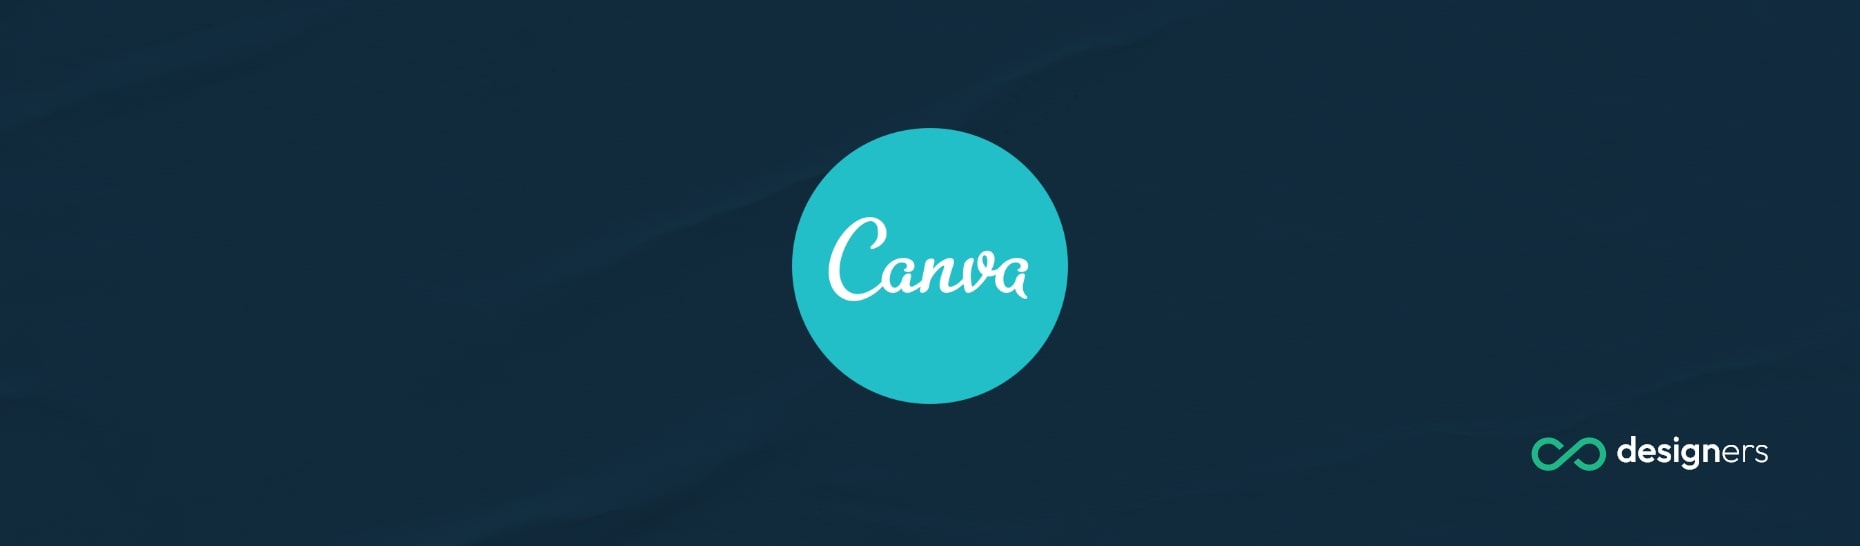 What Do Canva Employees Do?